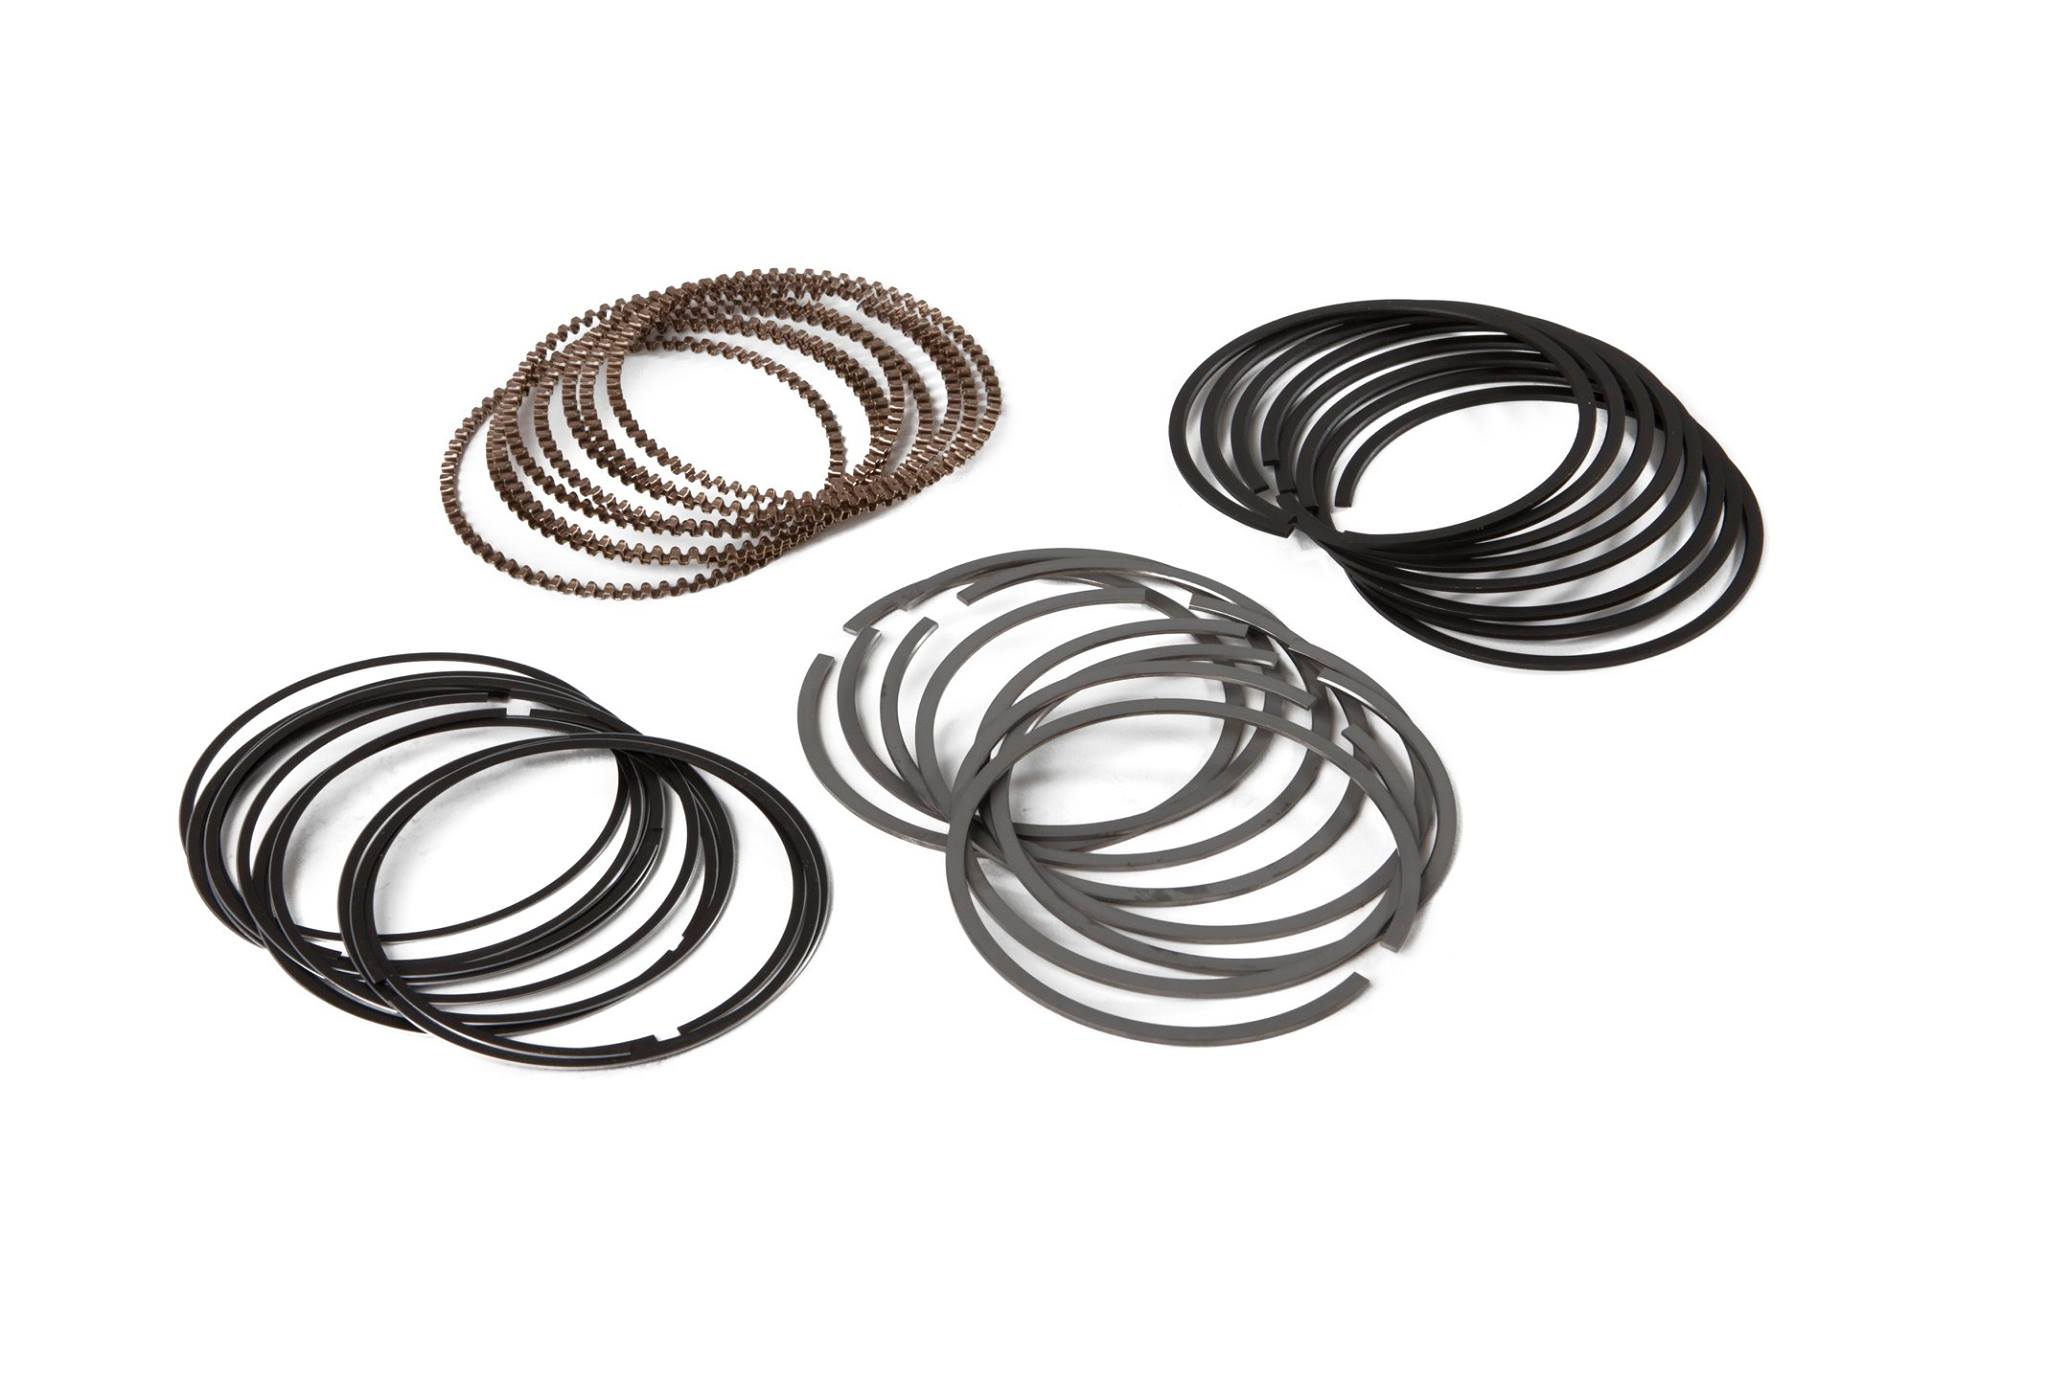 INSTALLATION INSTRUCTIONS: PISTON RINGS - Akerly & Childs